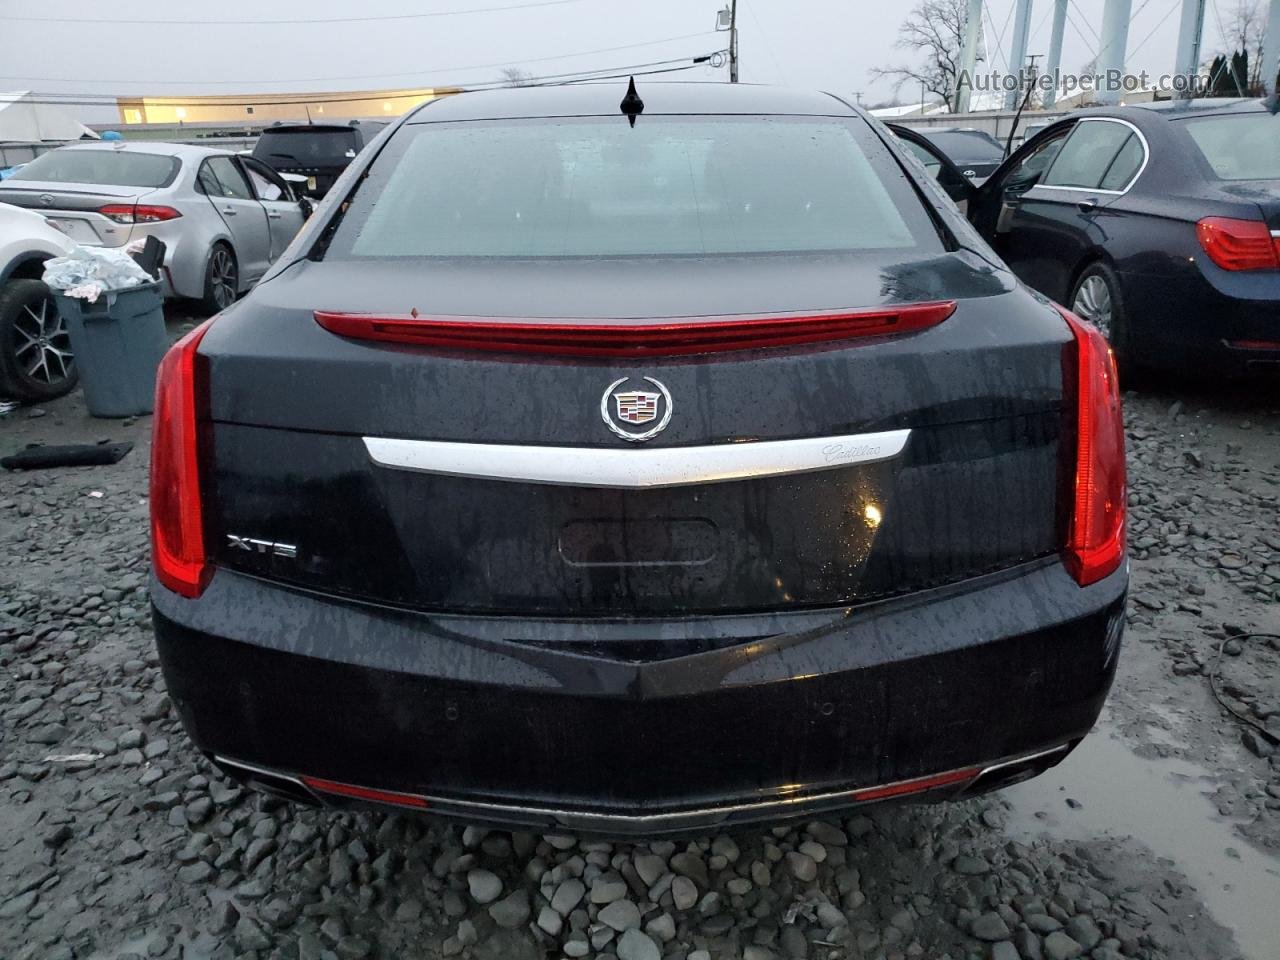 2013 Cadillac Xts Luxury Collection Black vin: 2G61P5S32D9245921